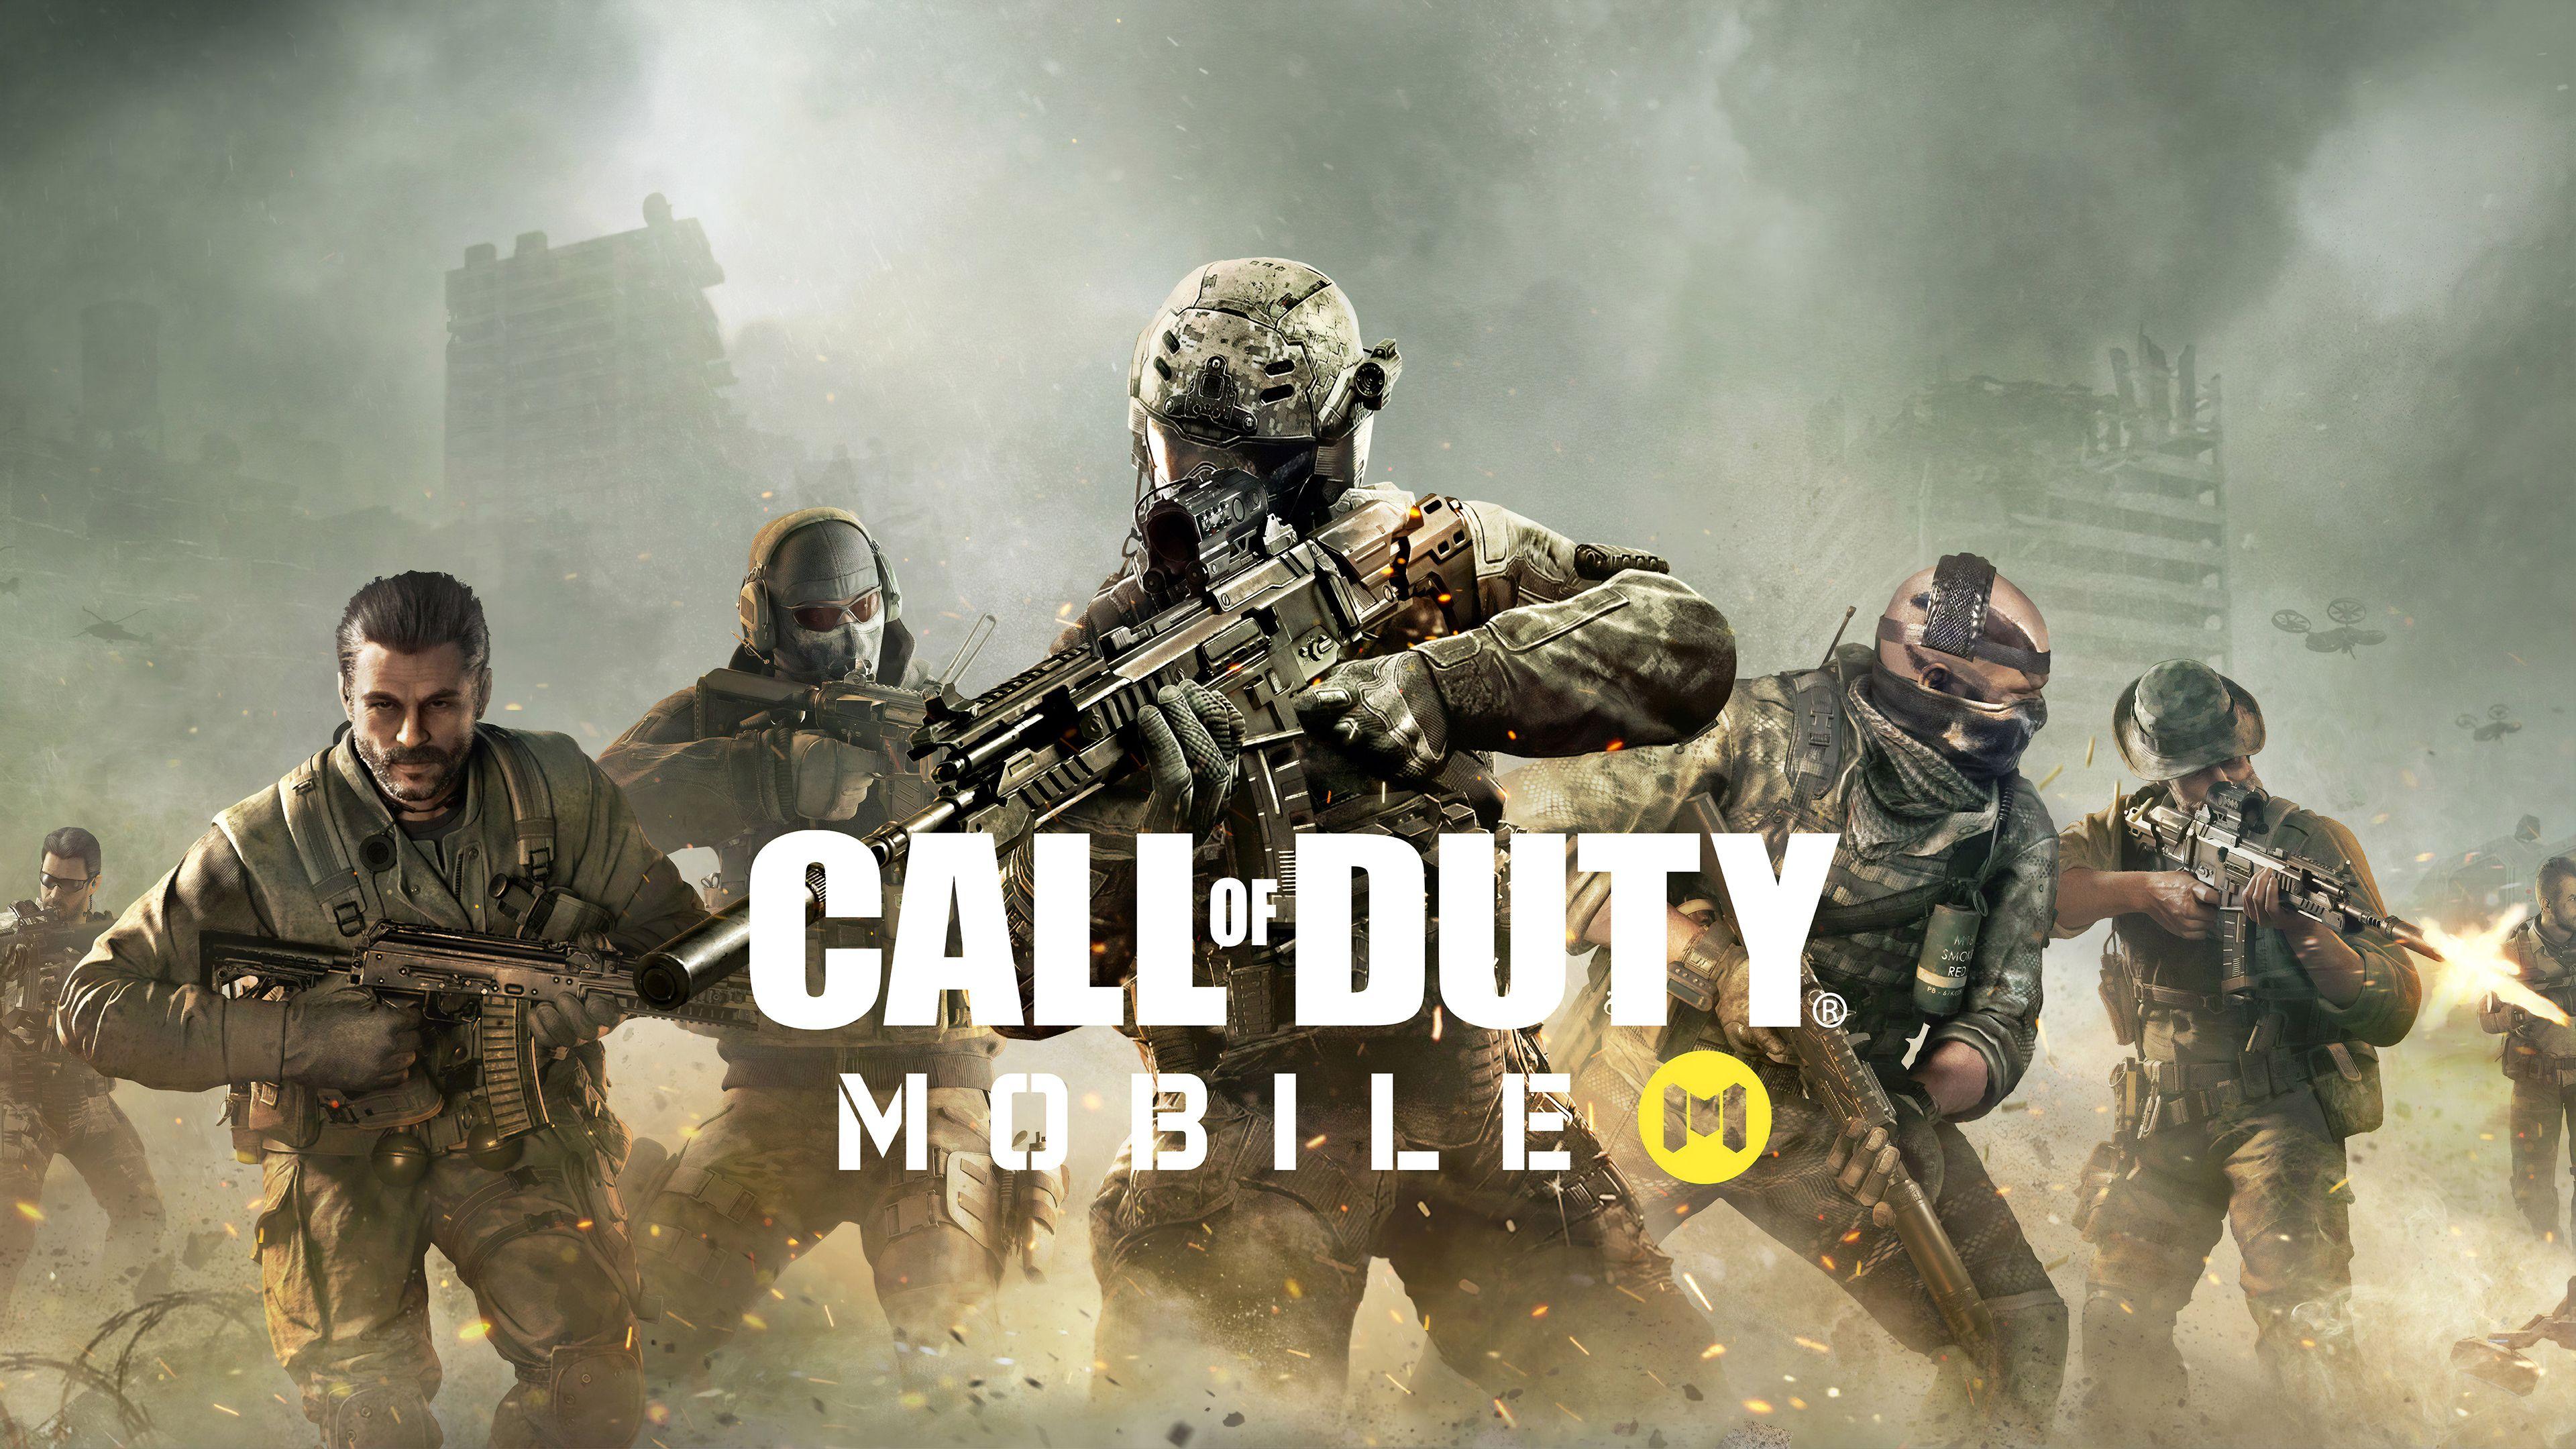 Top 10 Android Games on Play Store: Call Of Duty